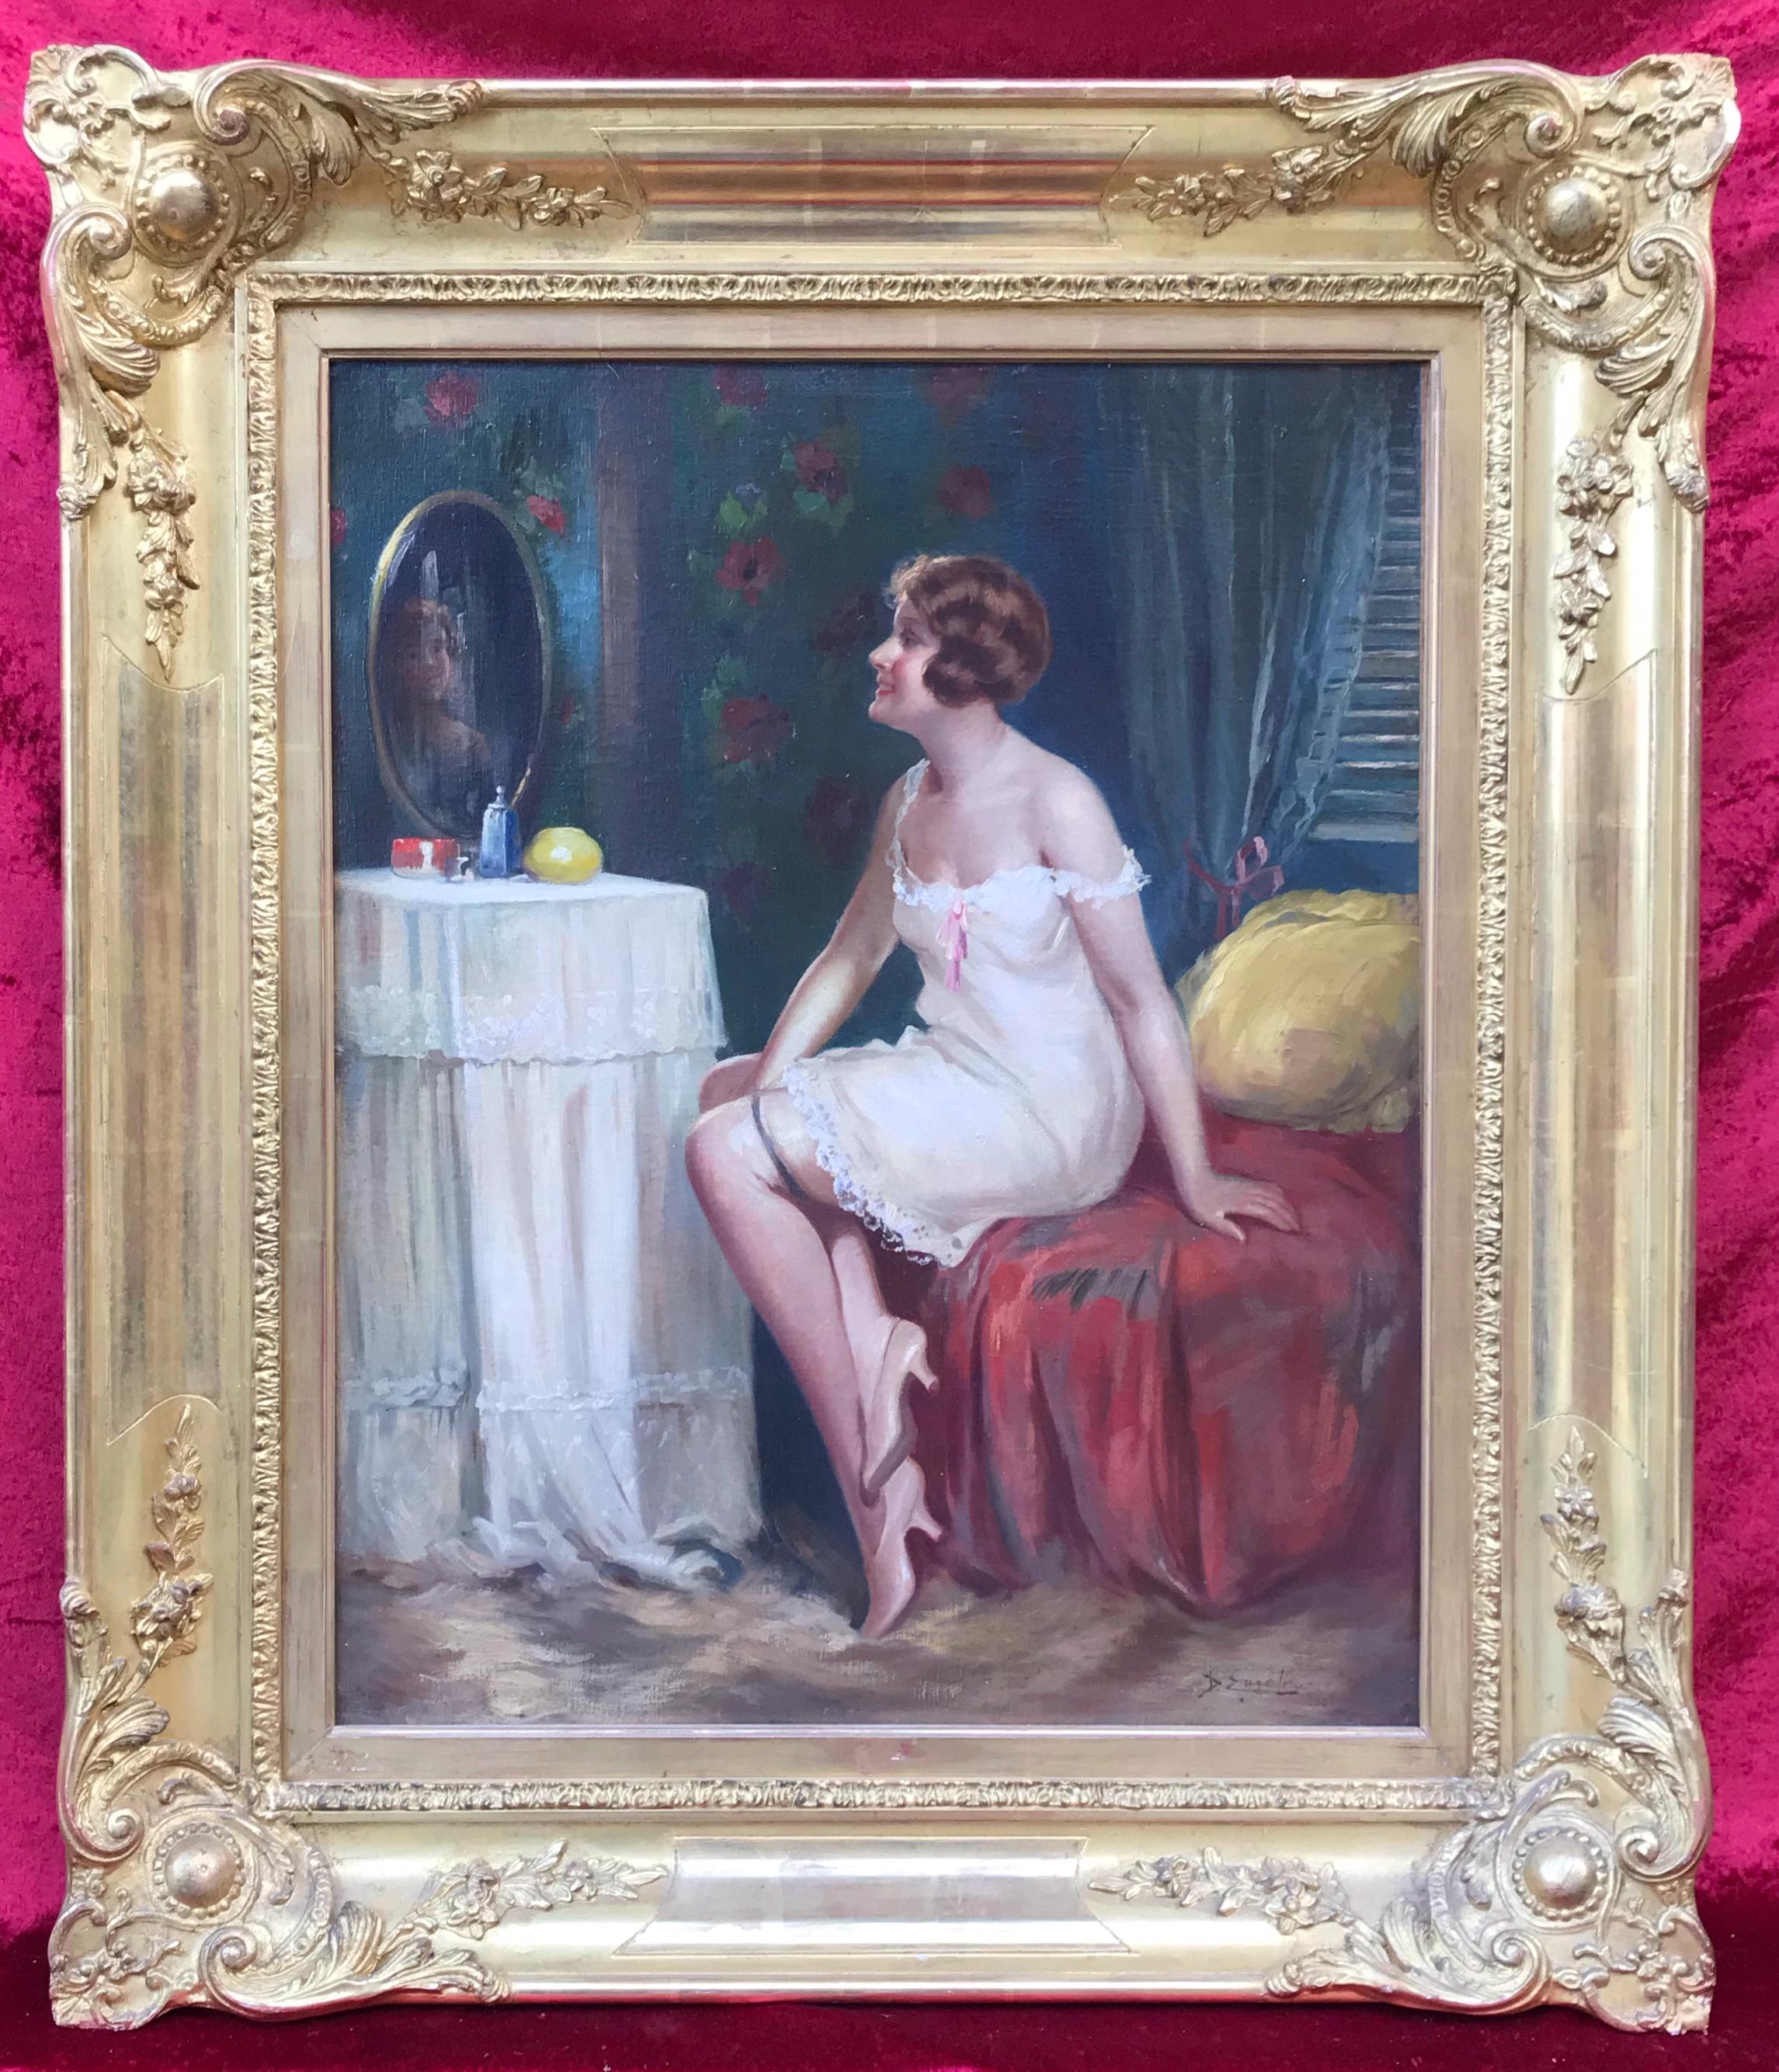 Lady at Dressing Table - Original Painting